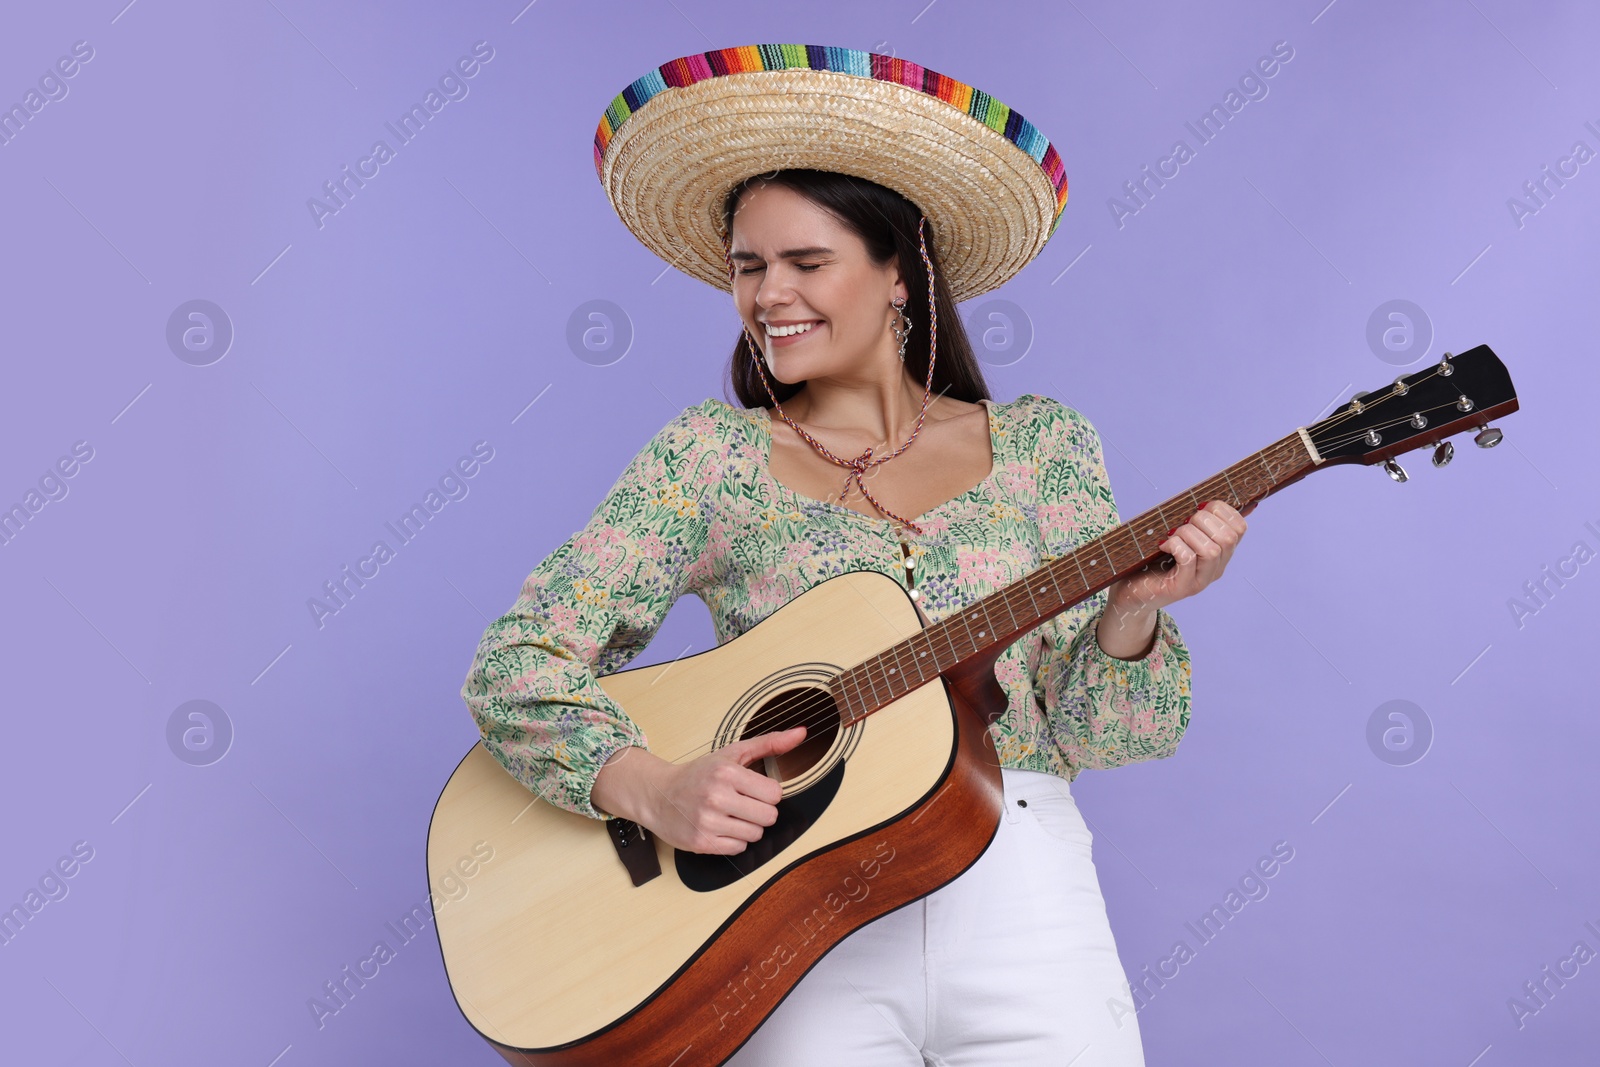 Photo of Young woman in Mexican sombrero hat playing guitar on violet background